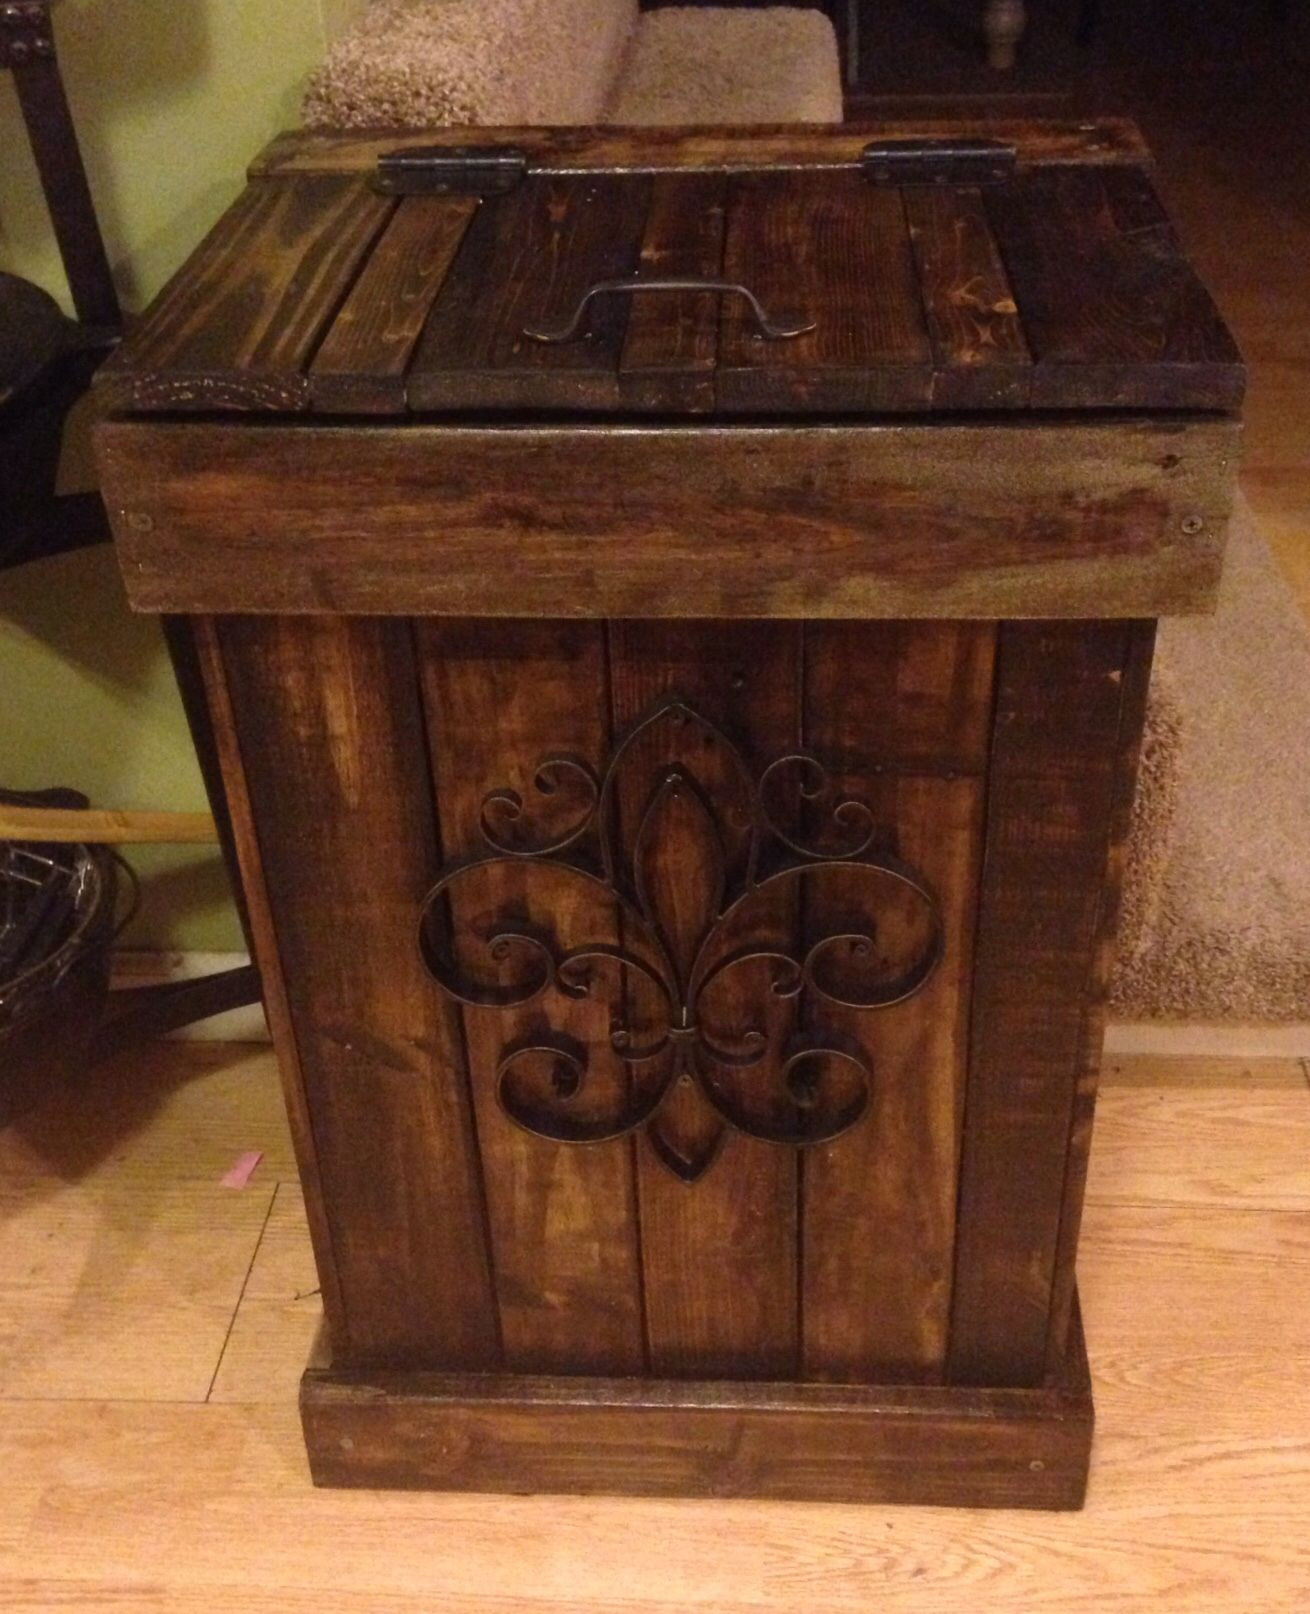 DIY Wood Trash Can
 30 gallon Wooden Trash Can made from wooden pallets